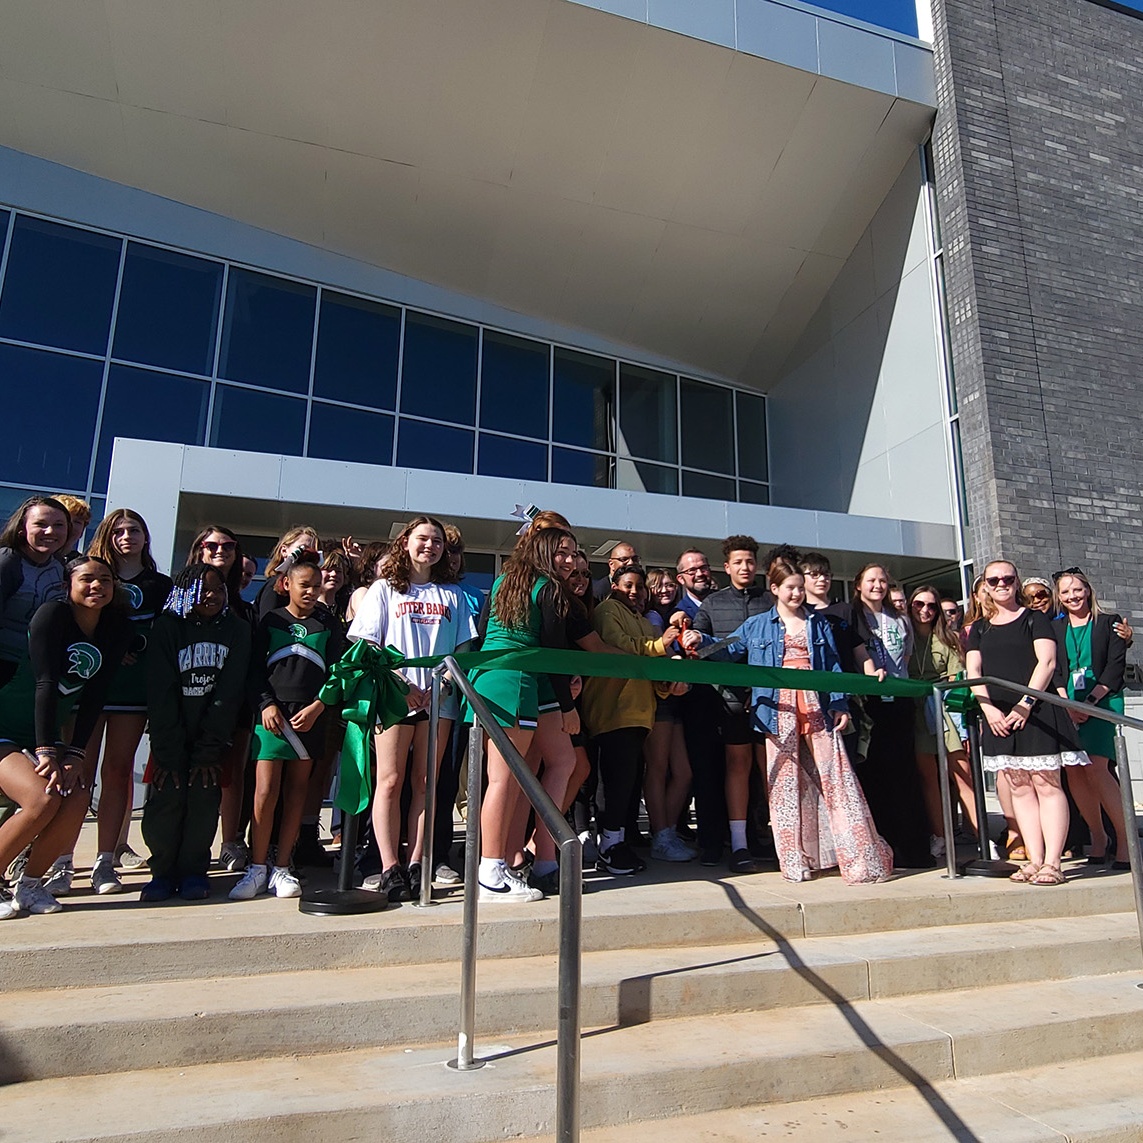 Students, teachers, administrators and others cut the ribbon to the new Jarrett Middle School.